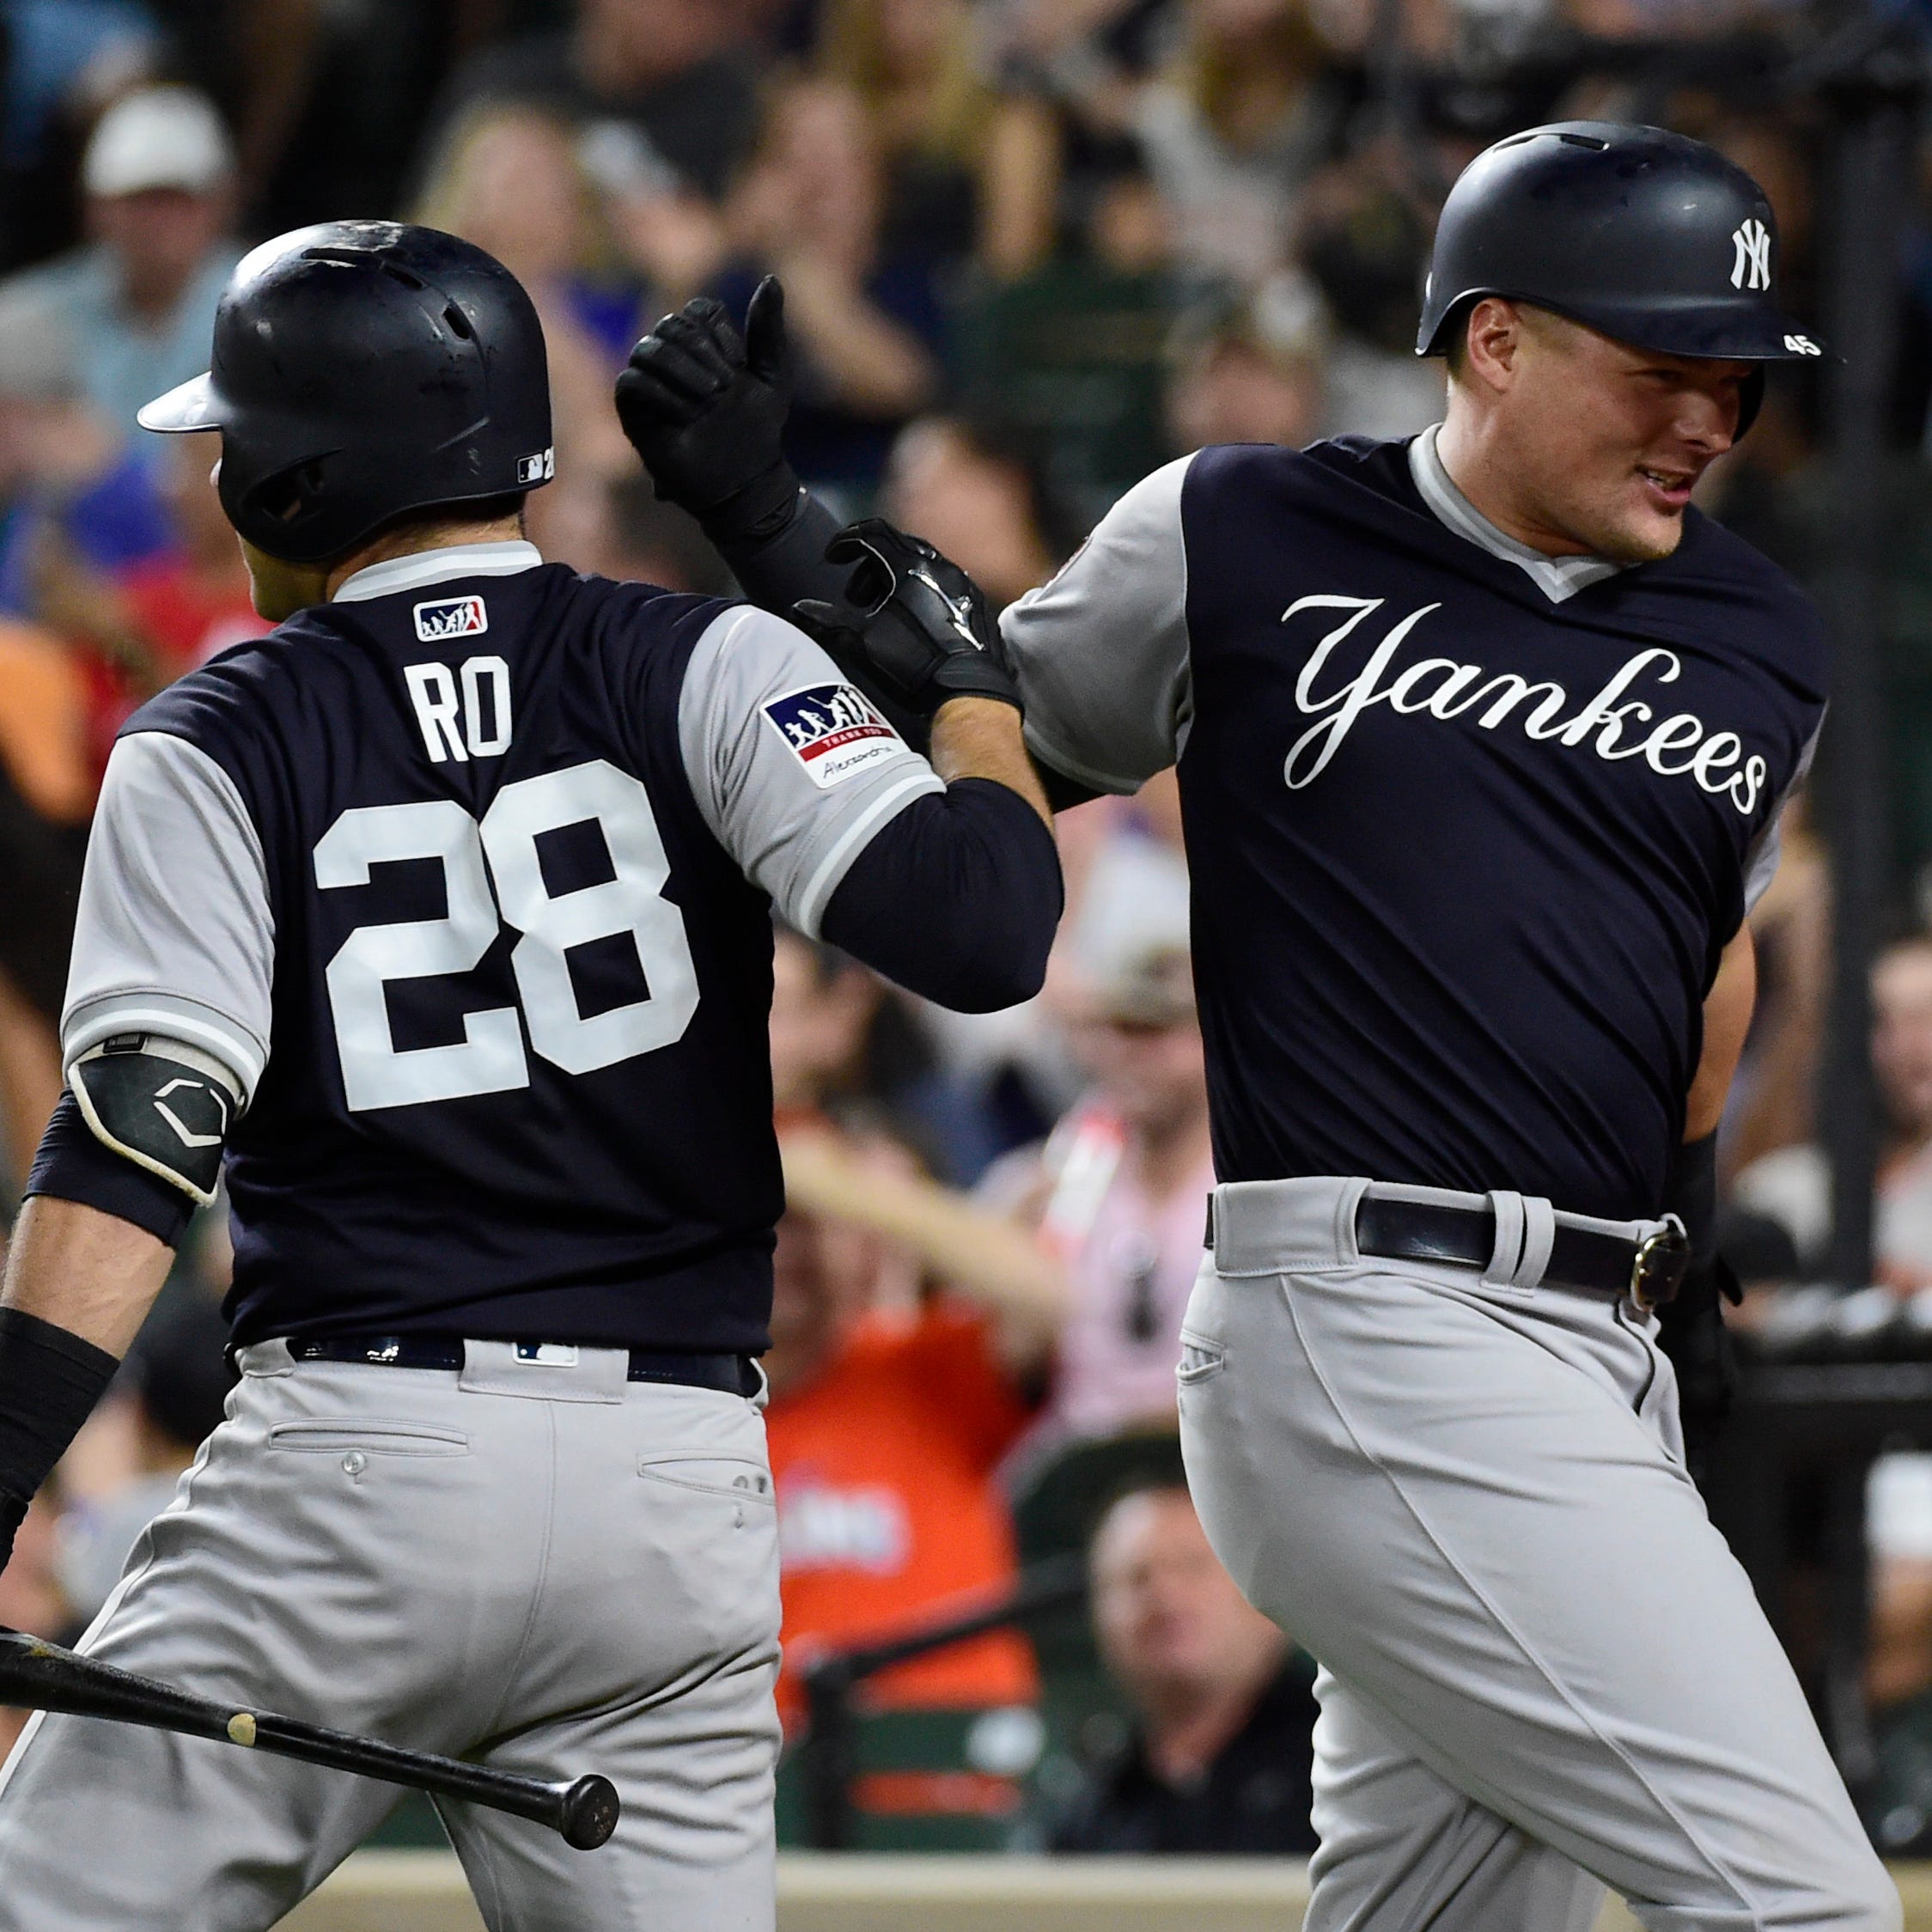 The Yankees' Luke Voit (right) celebrates Austin Romine after hitting a two-run home run against the Orioles.